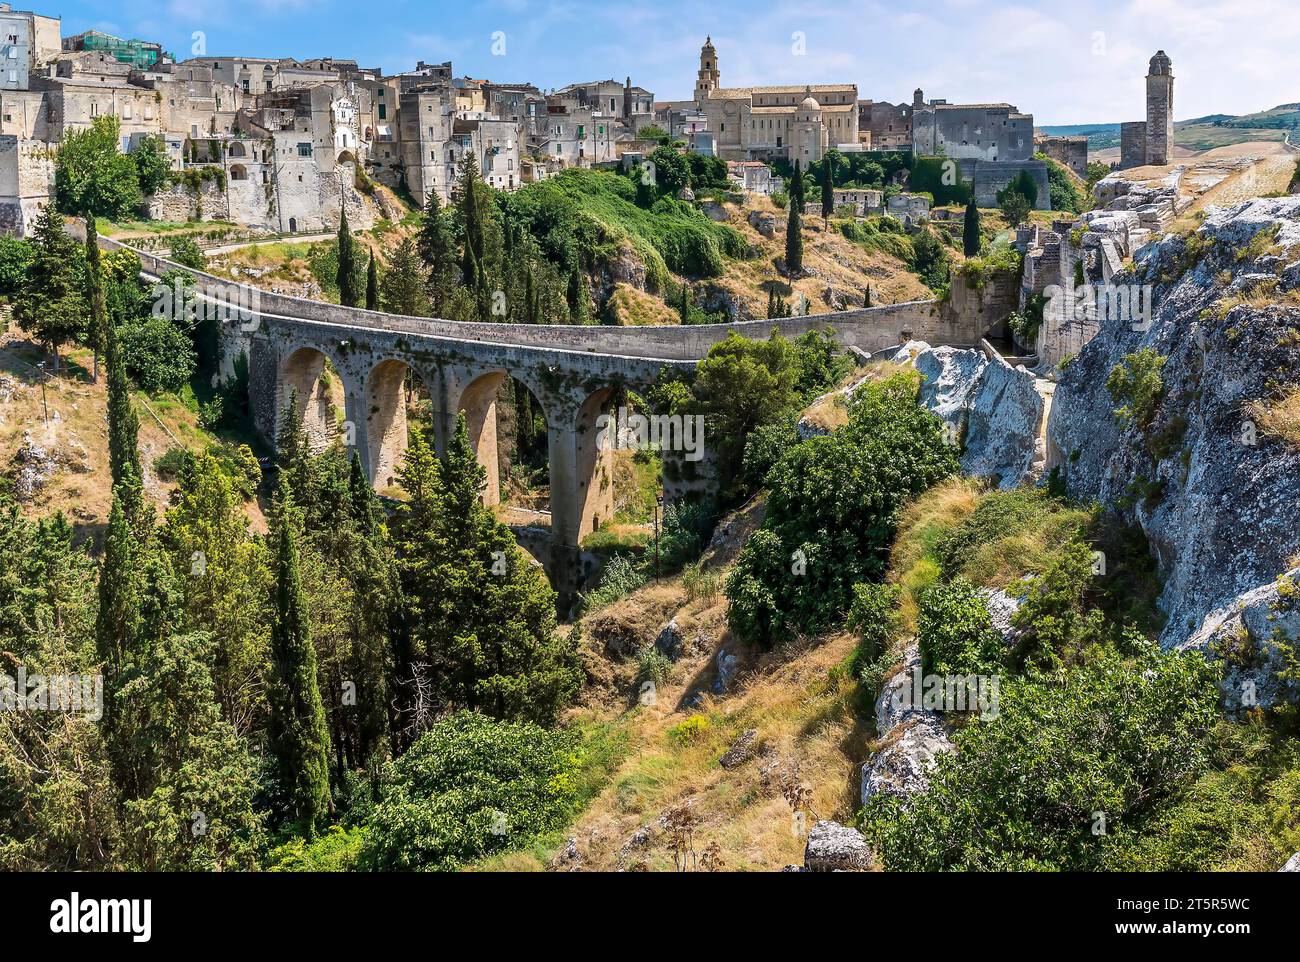 A view of  Gravina in Puglia, Italy with the Roman two tier bridge stretching into the town Stock Photo